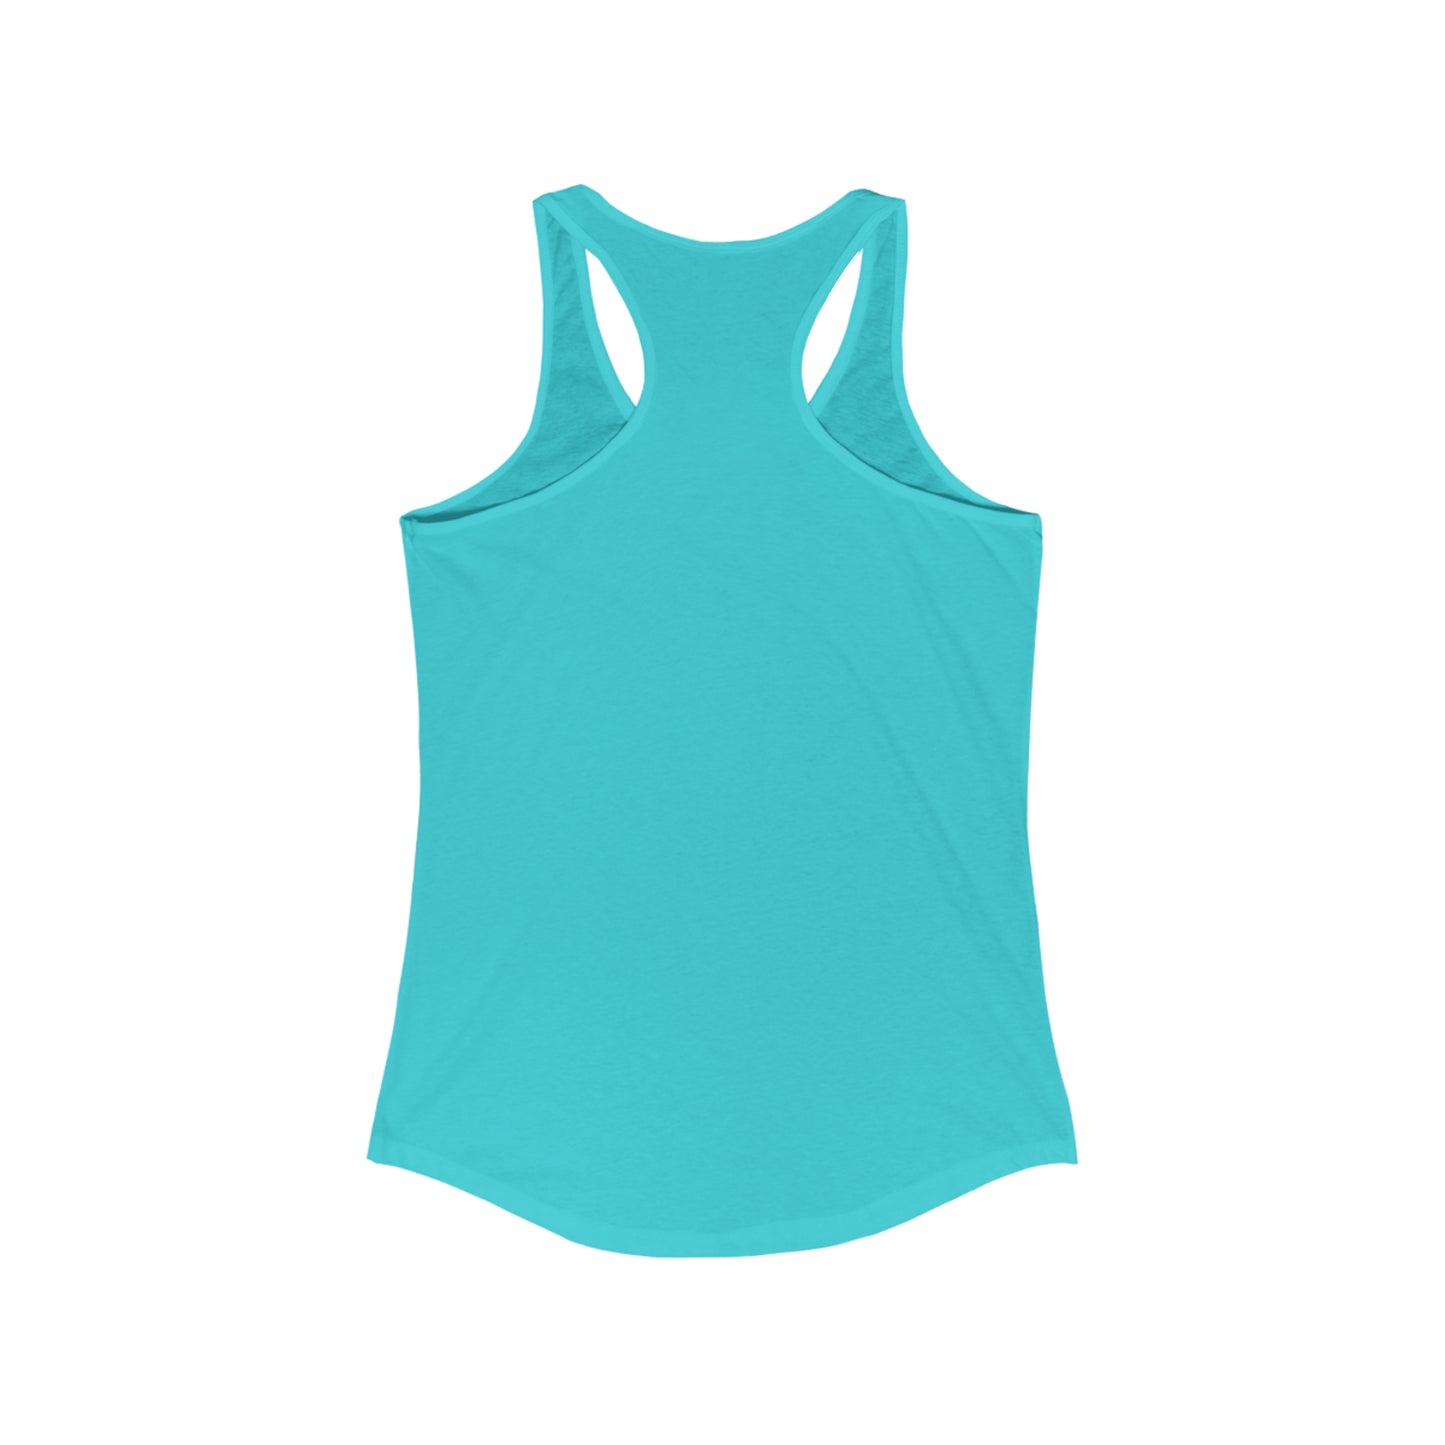 Long Road To Justice Women's Ideal Racerback Tank